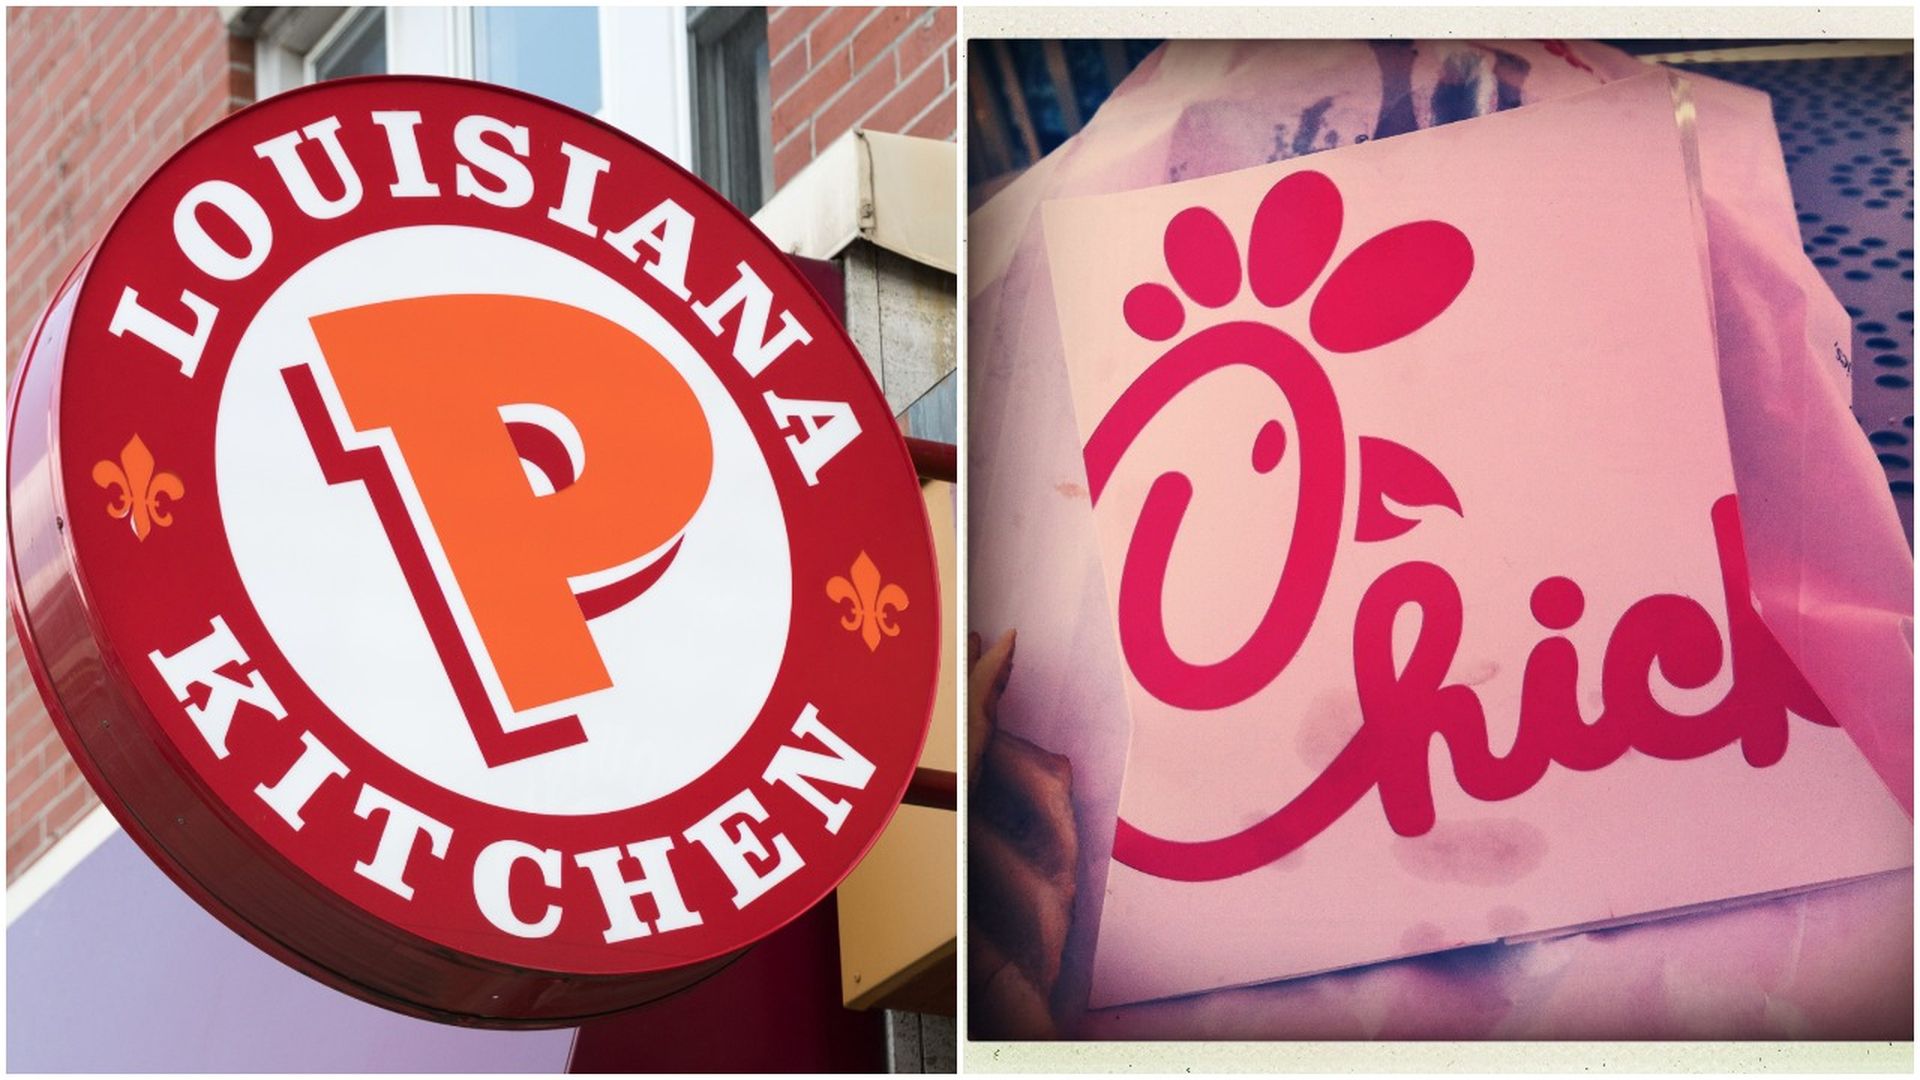 pic stitch of popeyes chicken sign and chick-fil-a sandwich